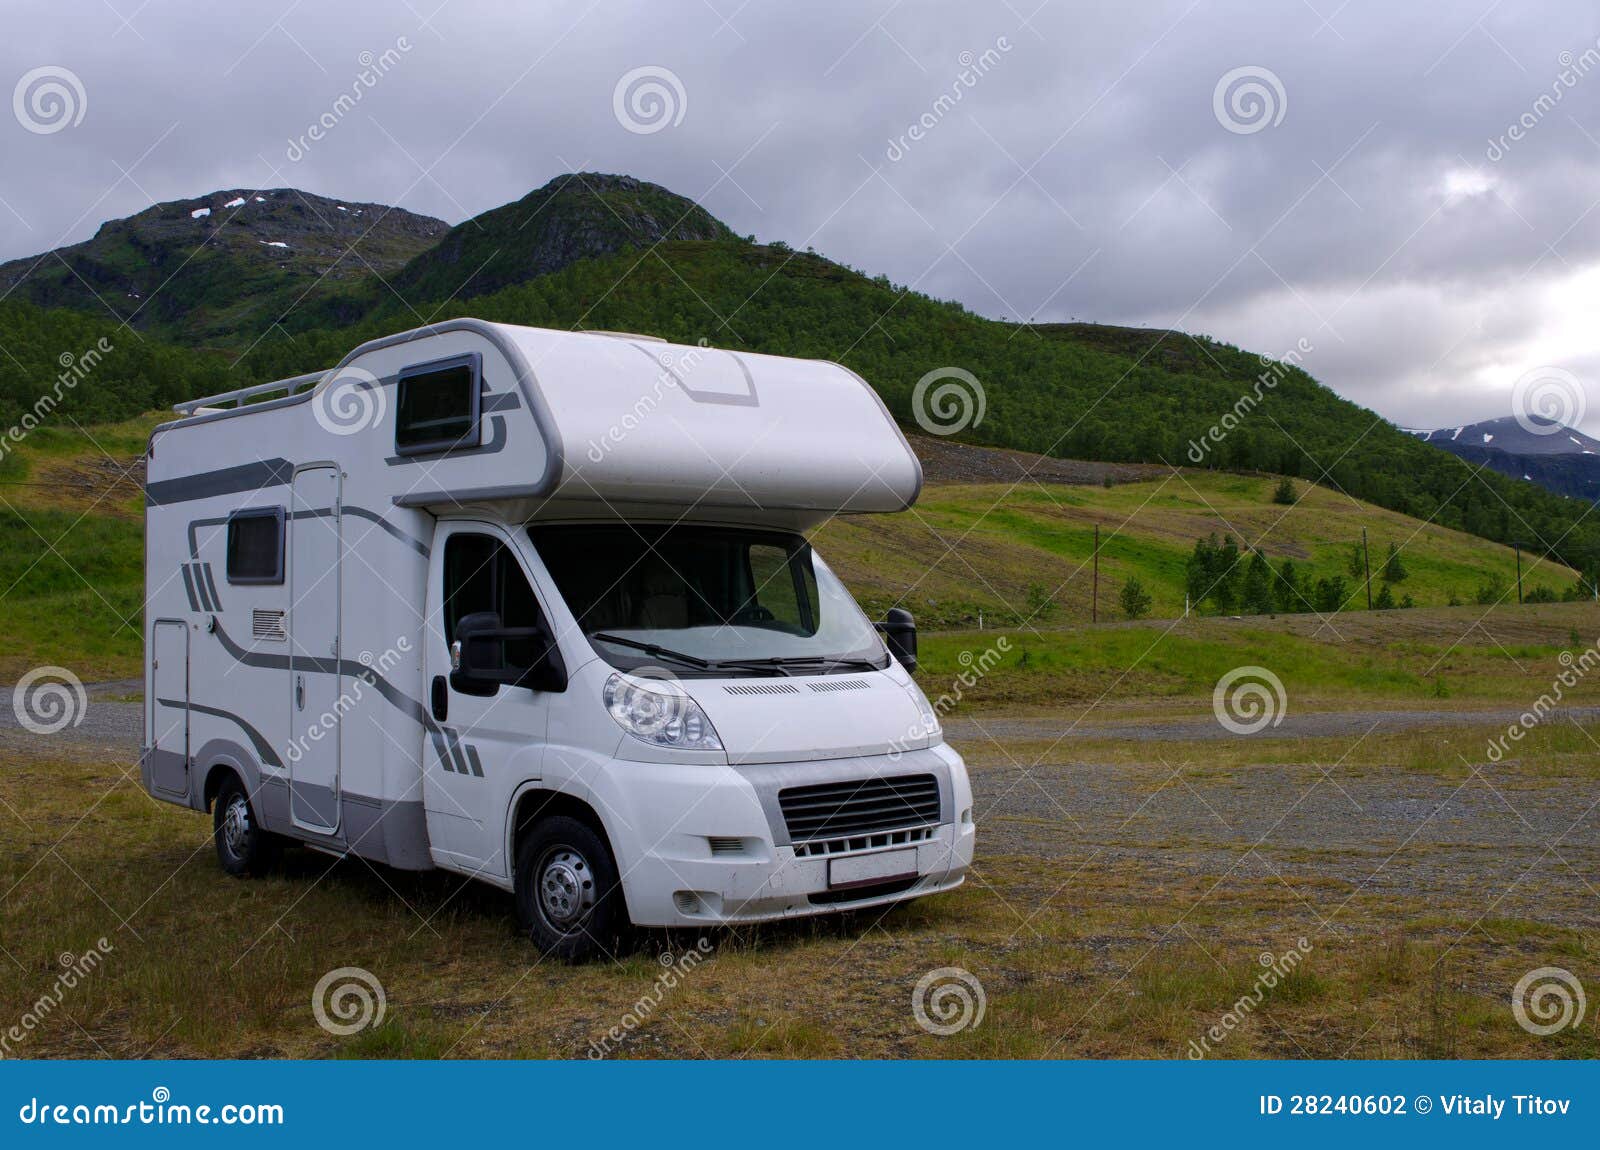 motorhome/ camper going on vacation over scandinavia